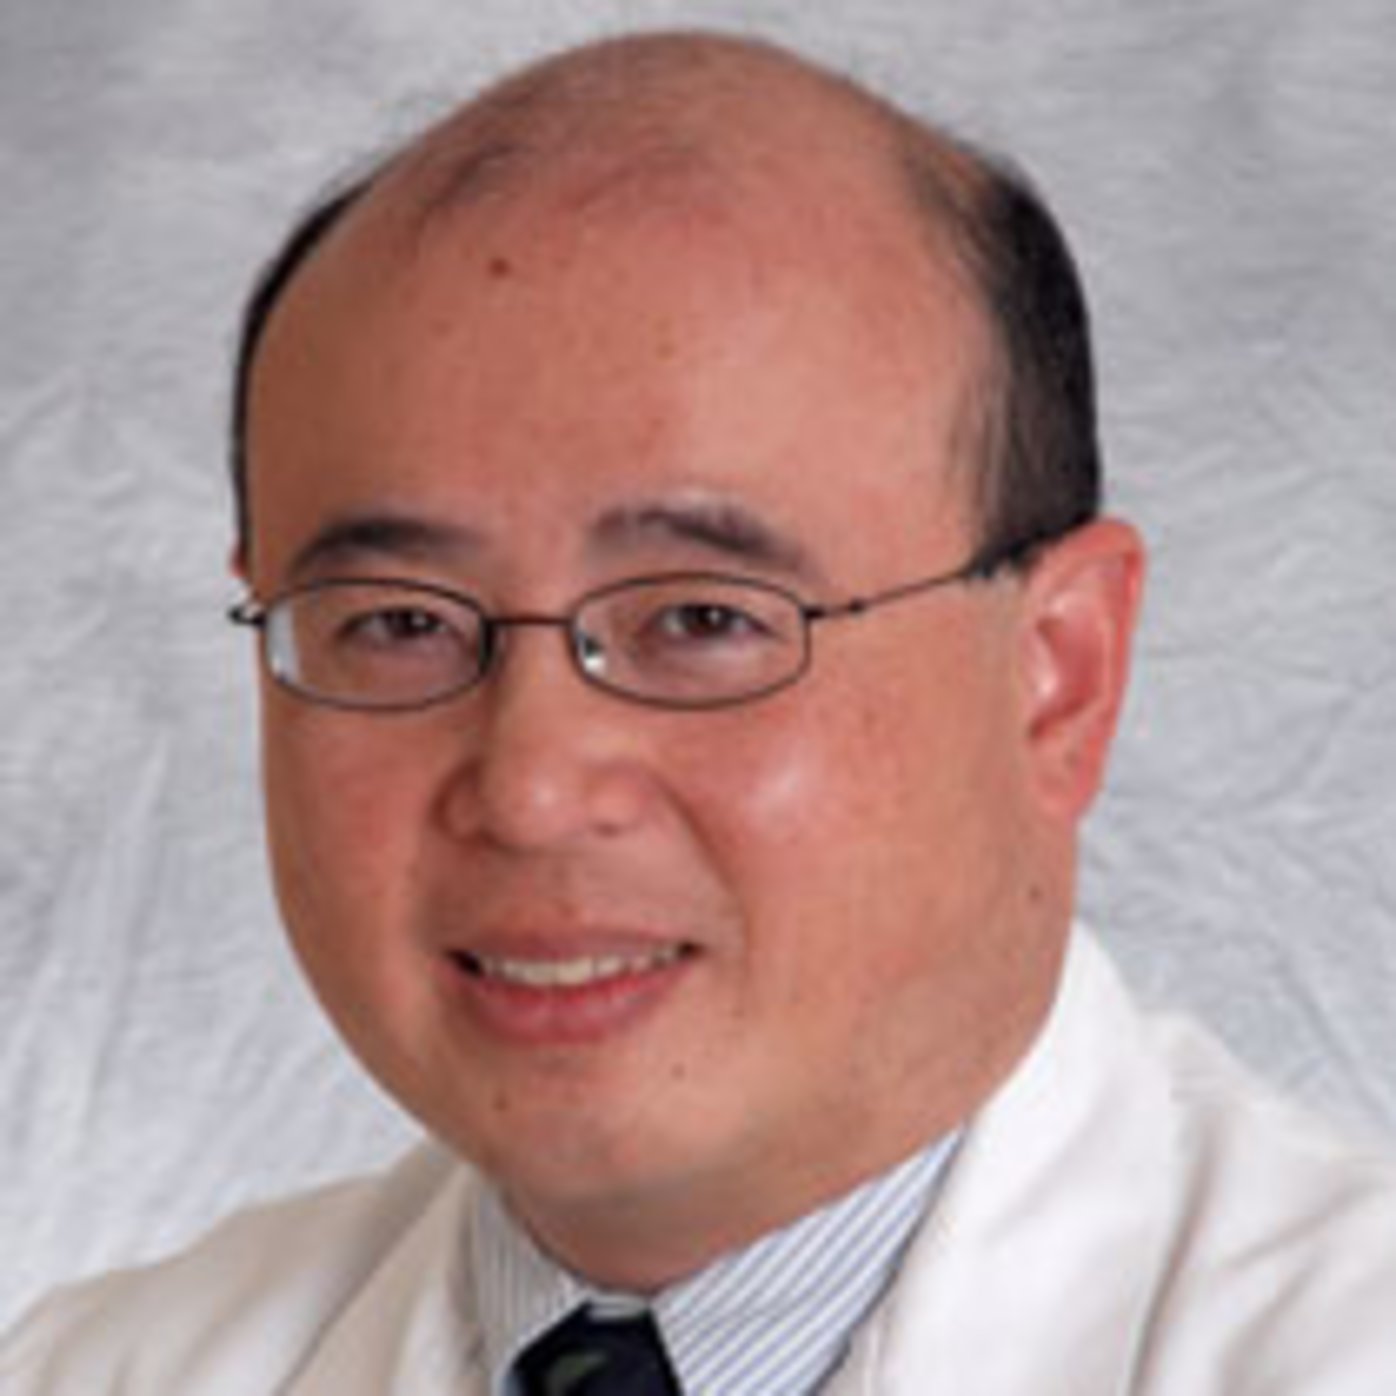 Dr. Jack Hsiao